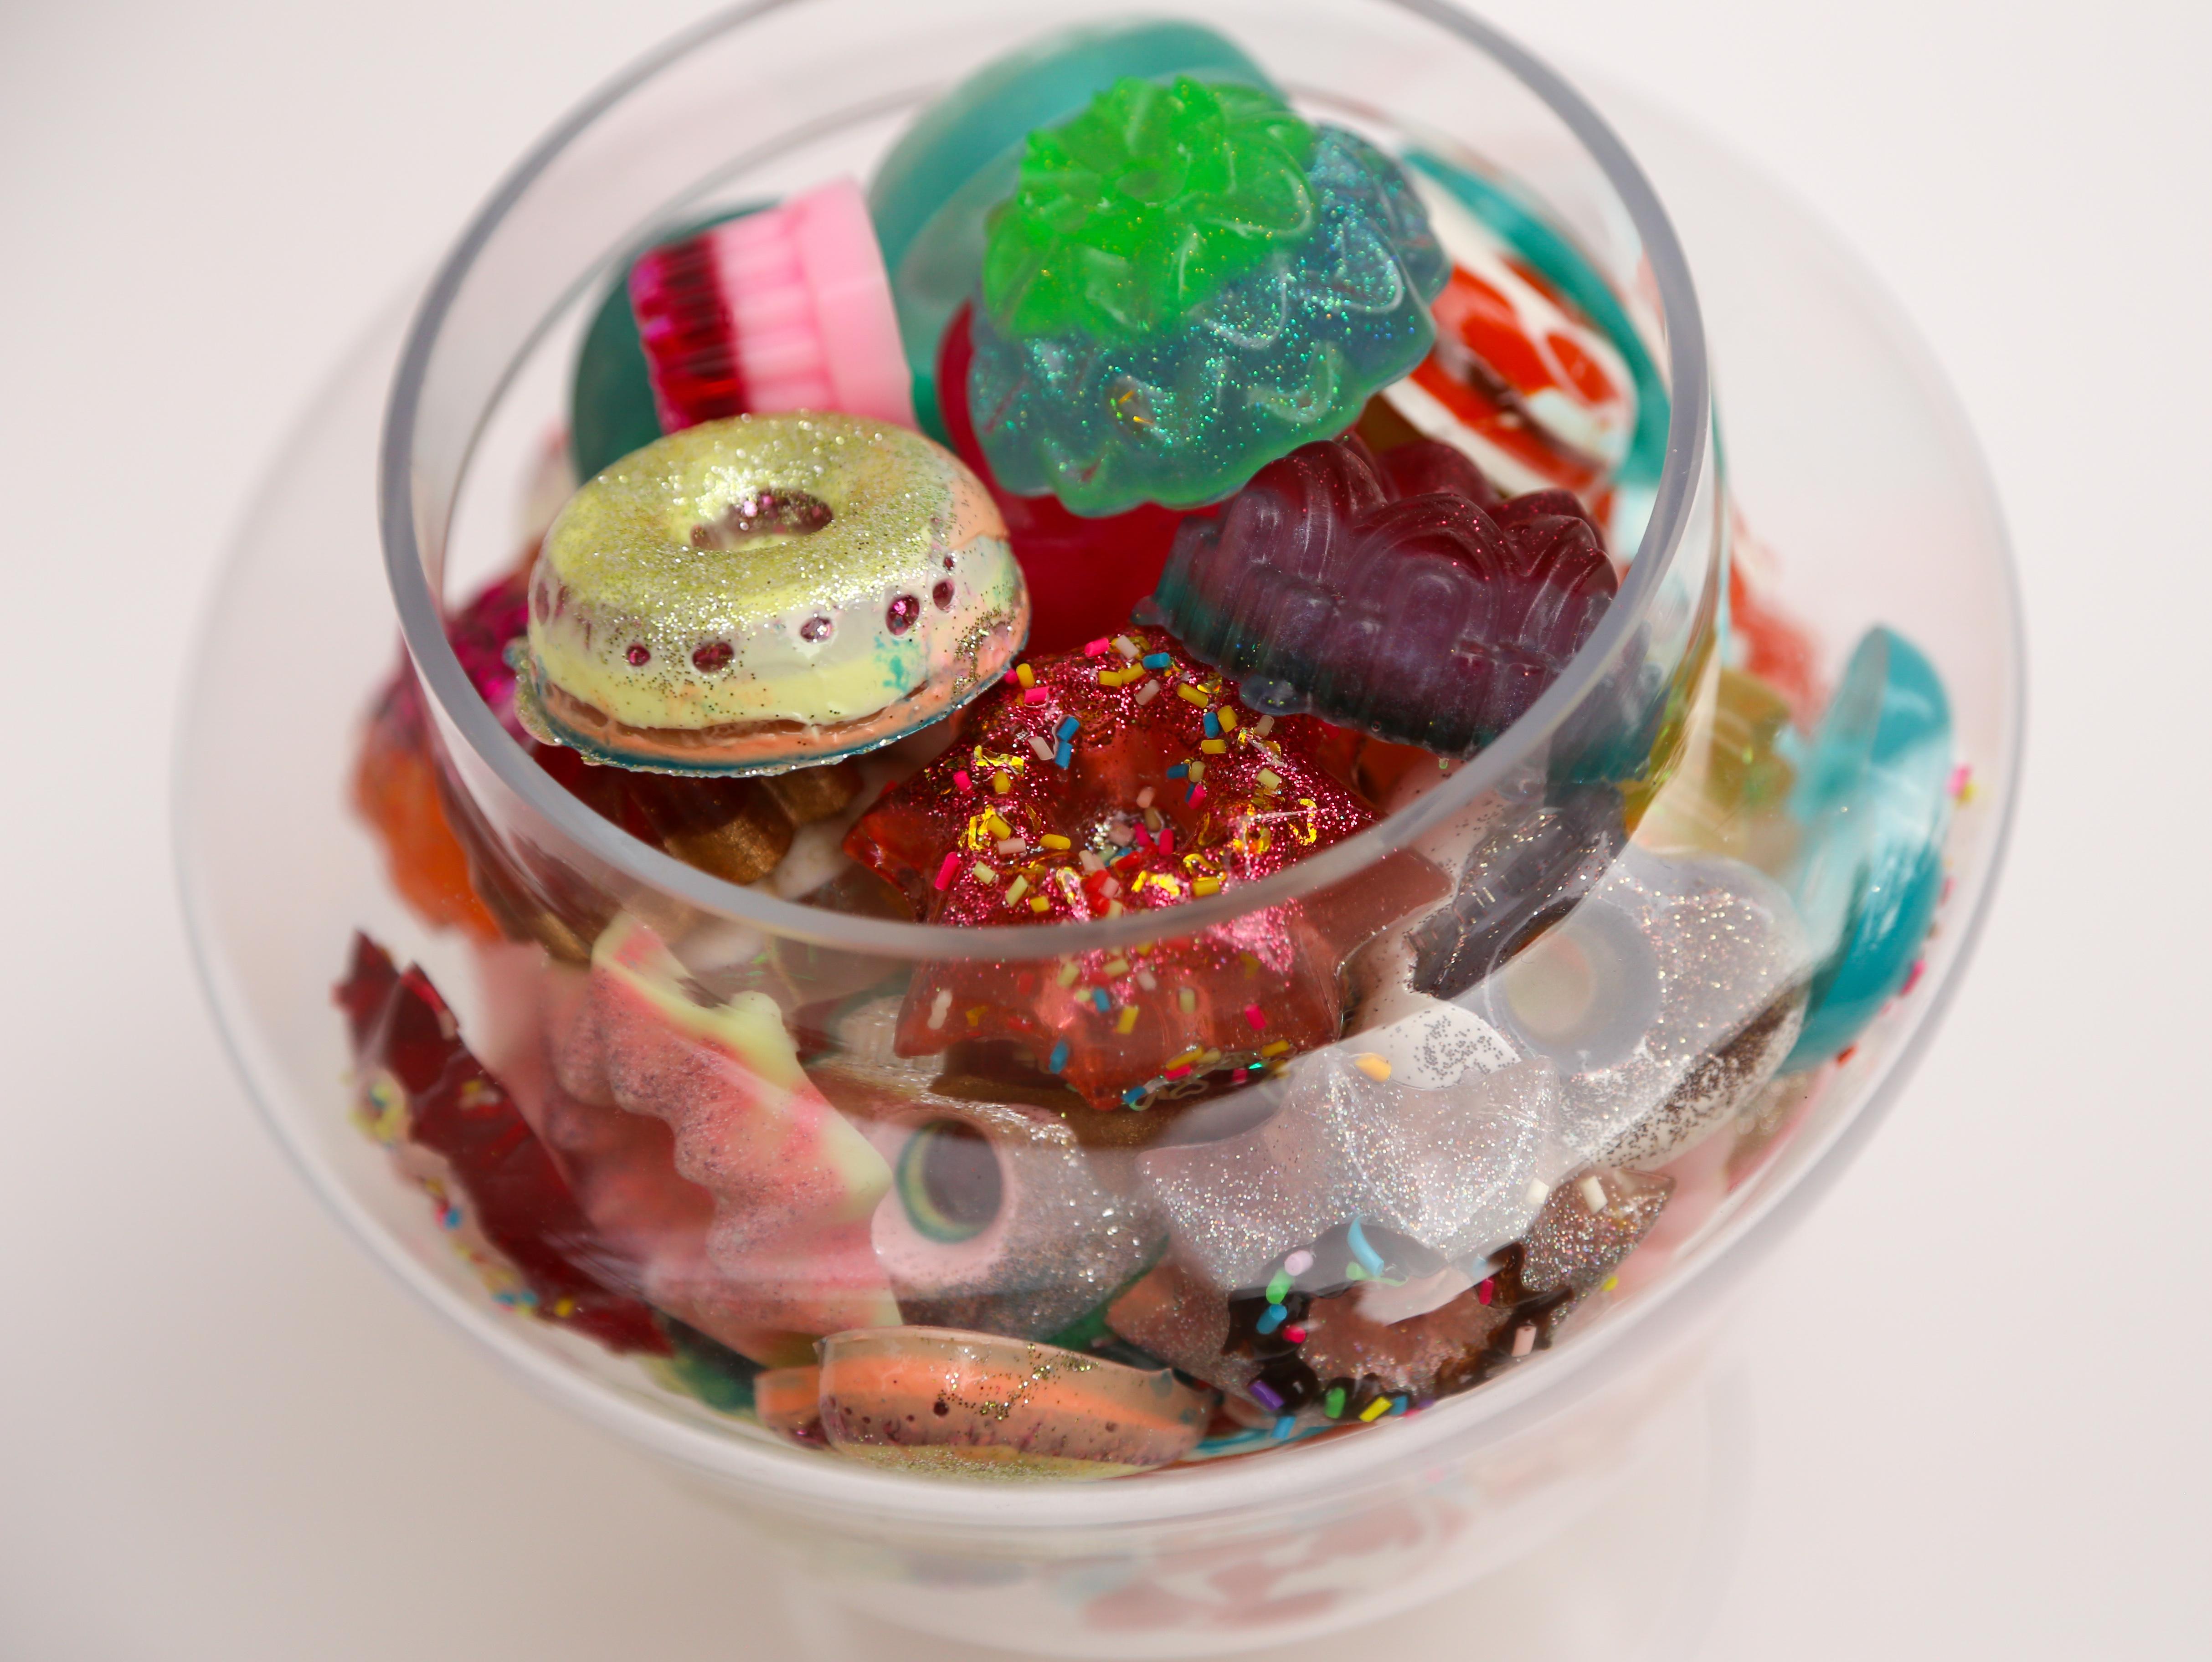 Donut Jar - Handmade Mini Resin Donuts in Glass Candy Jar / colorful  - Sculpture by Betsy Enzensberger